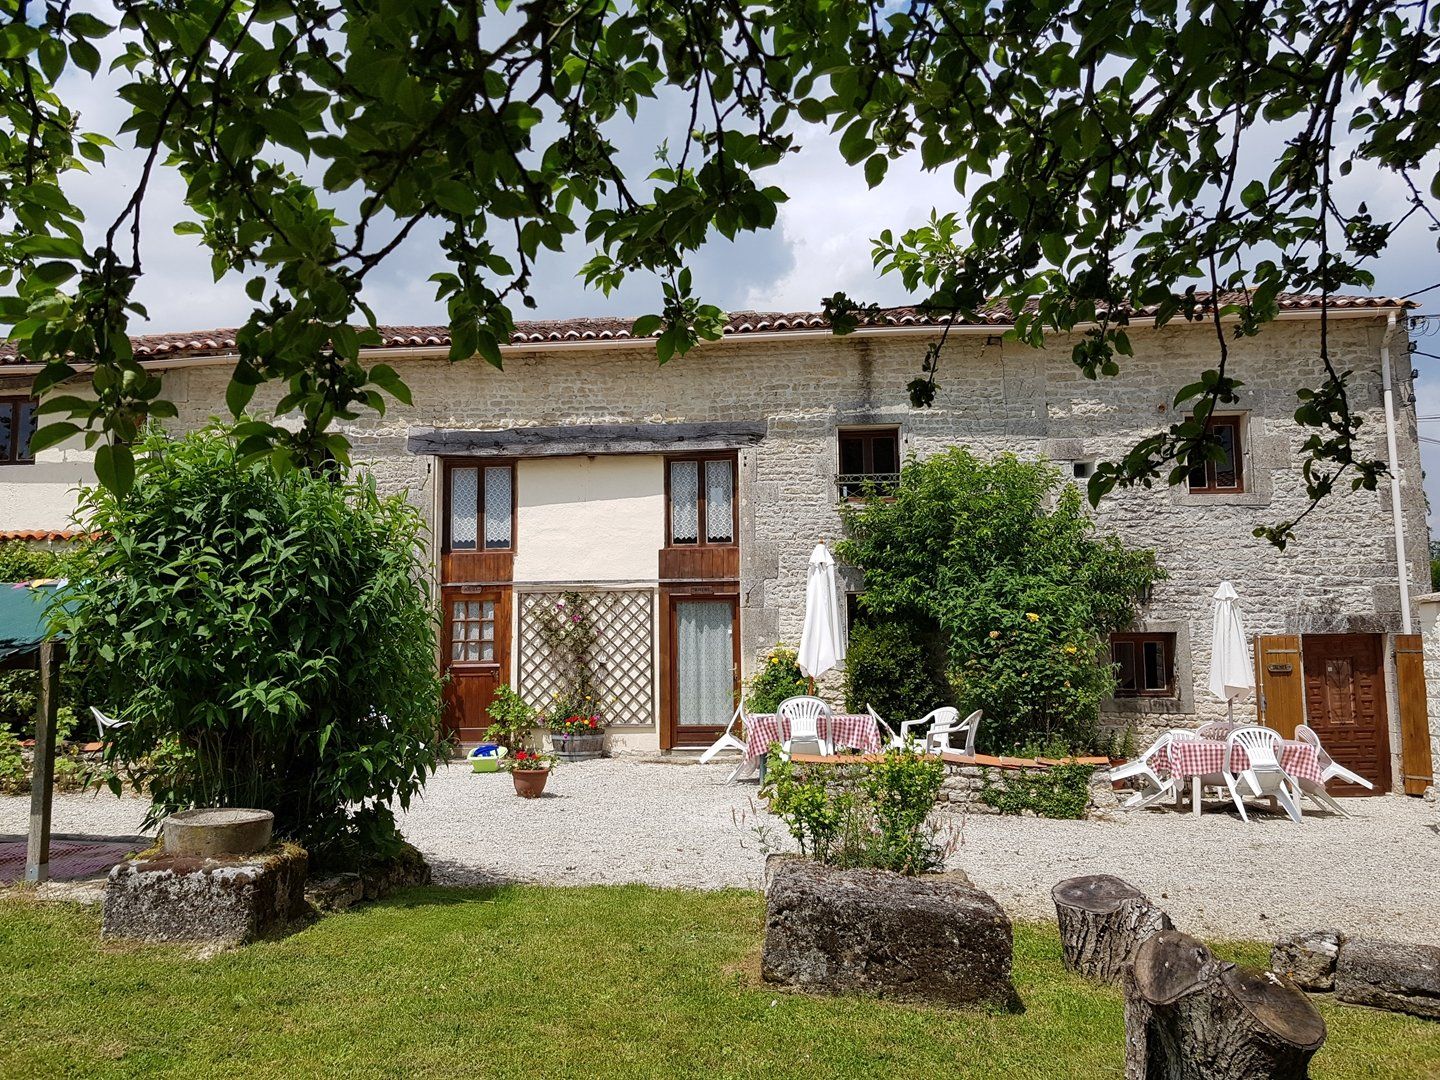 View from garden under a tree, stone holiday cottages in France